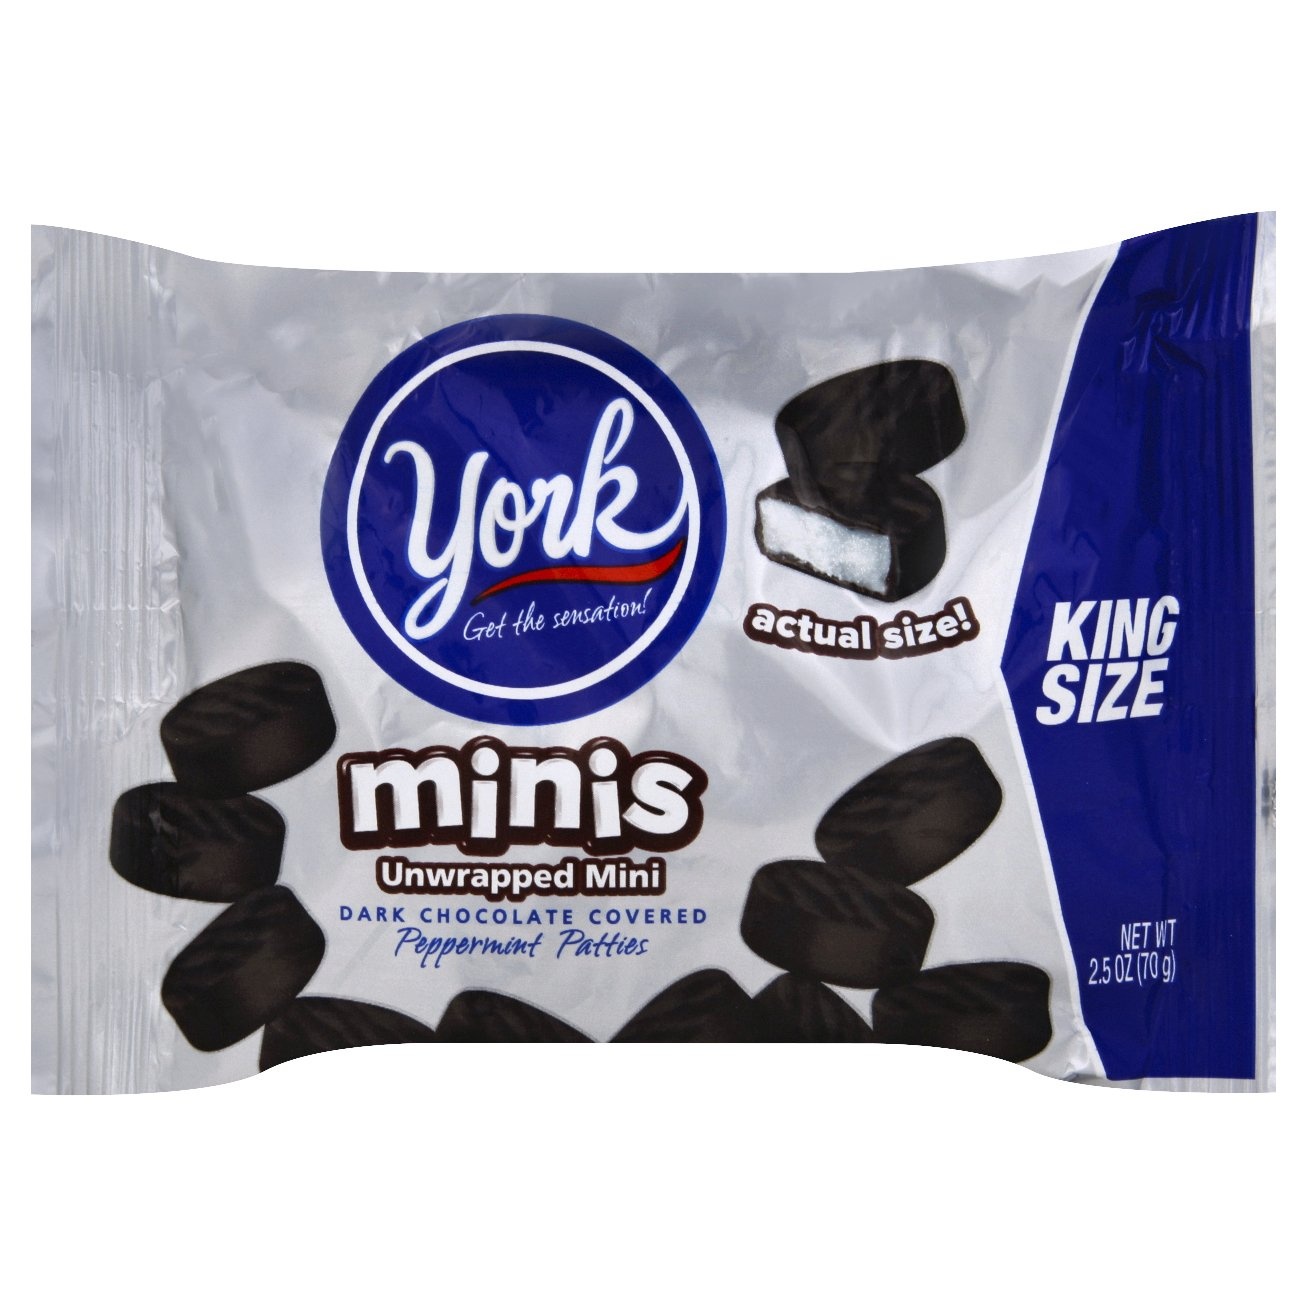 slide 1 of 5, York King Size Peppermint Patties Unwrapped Minis, 2.5 oz